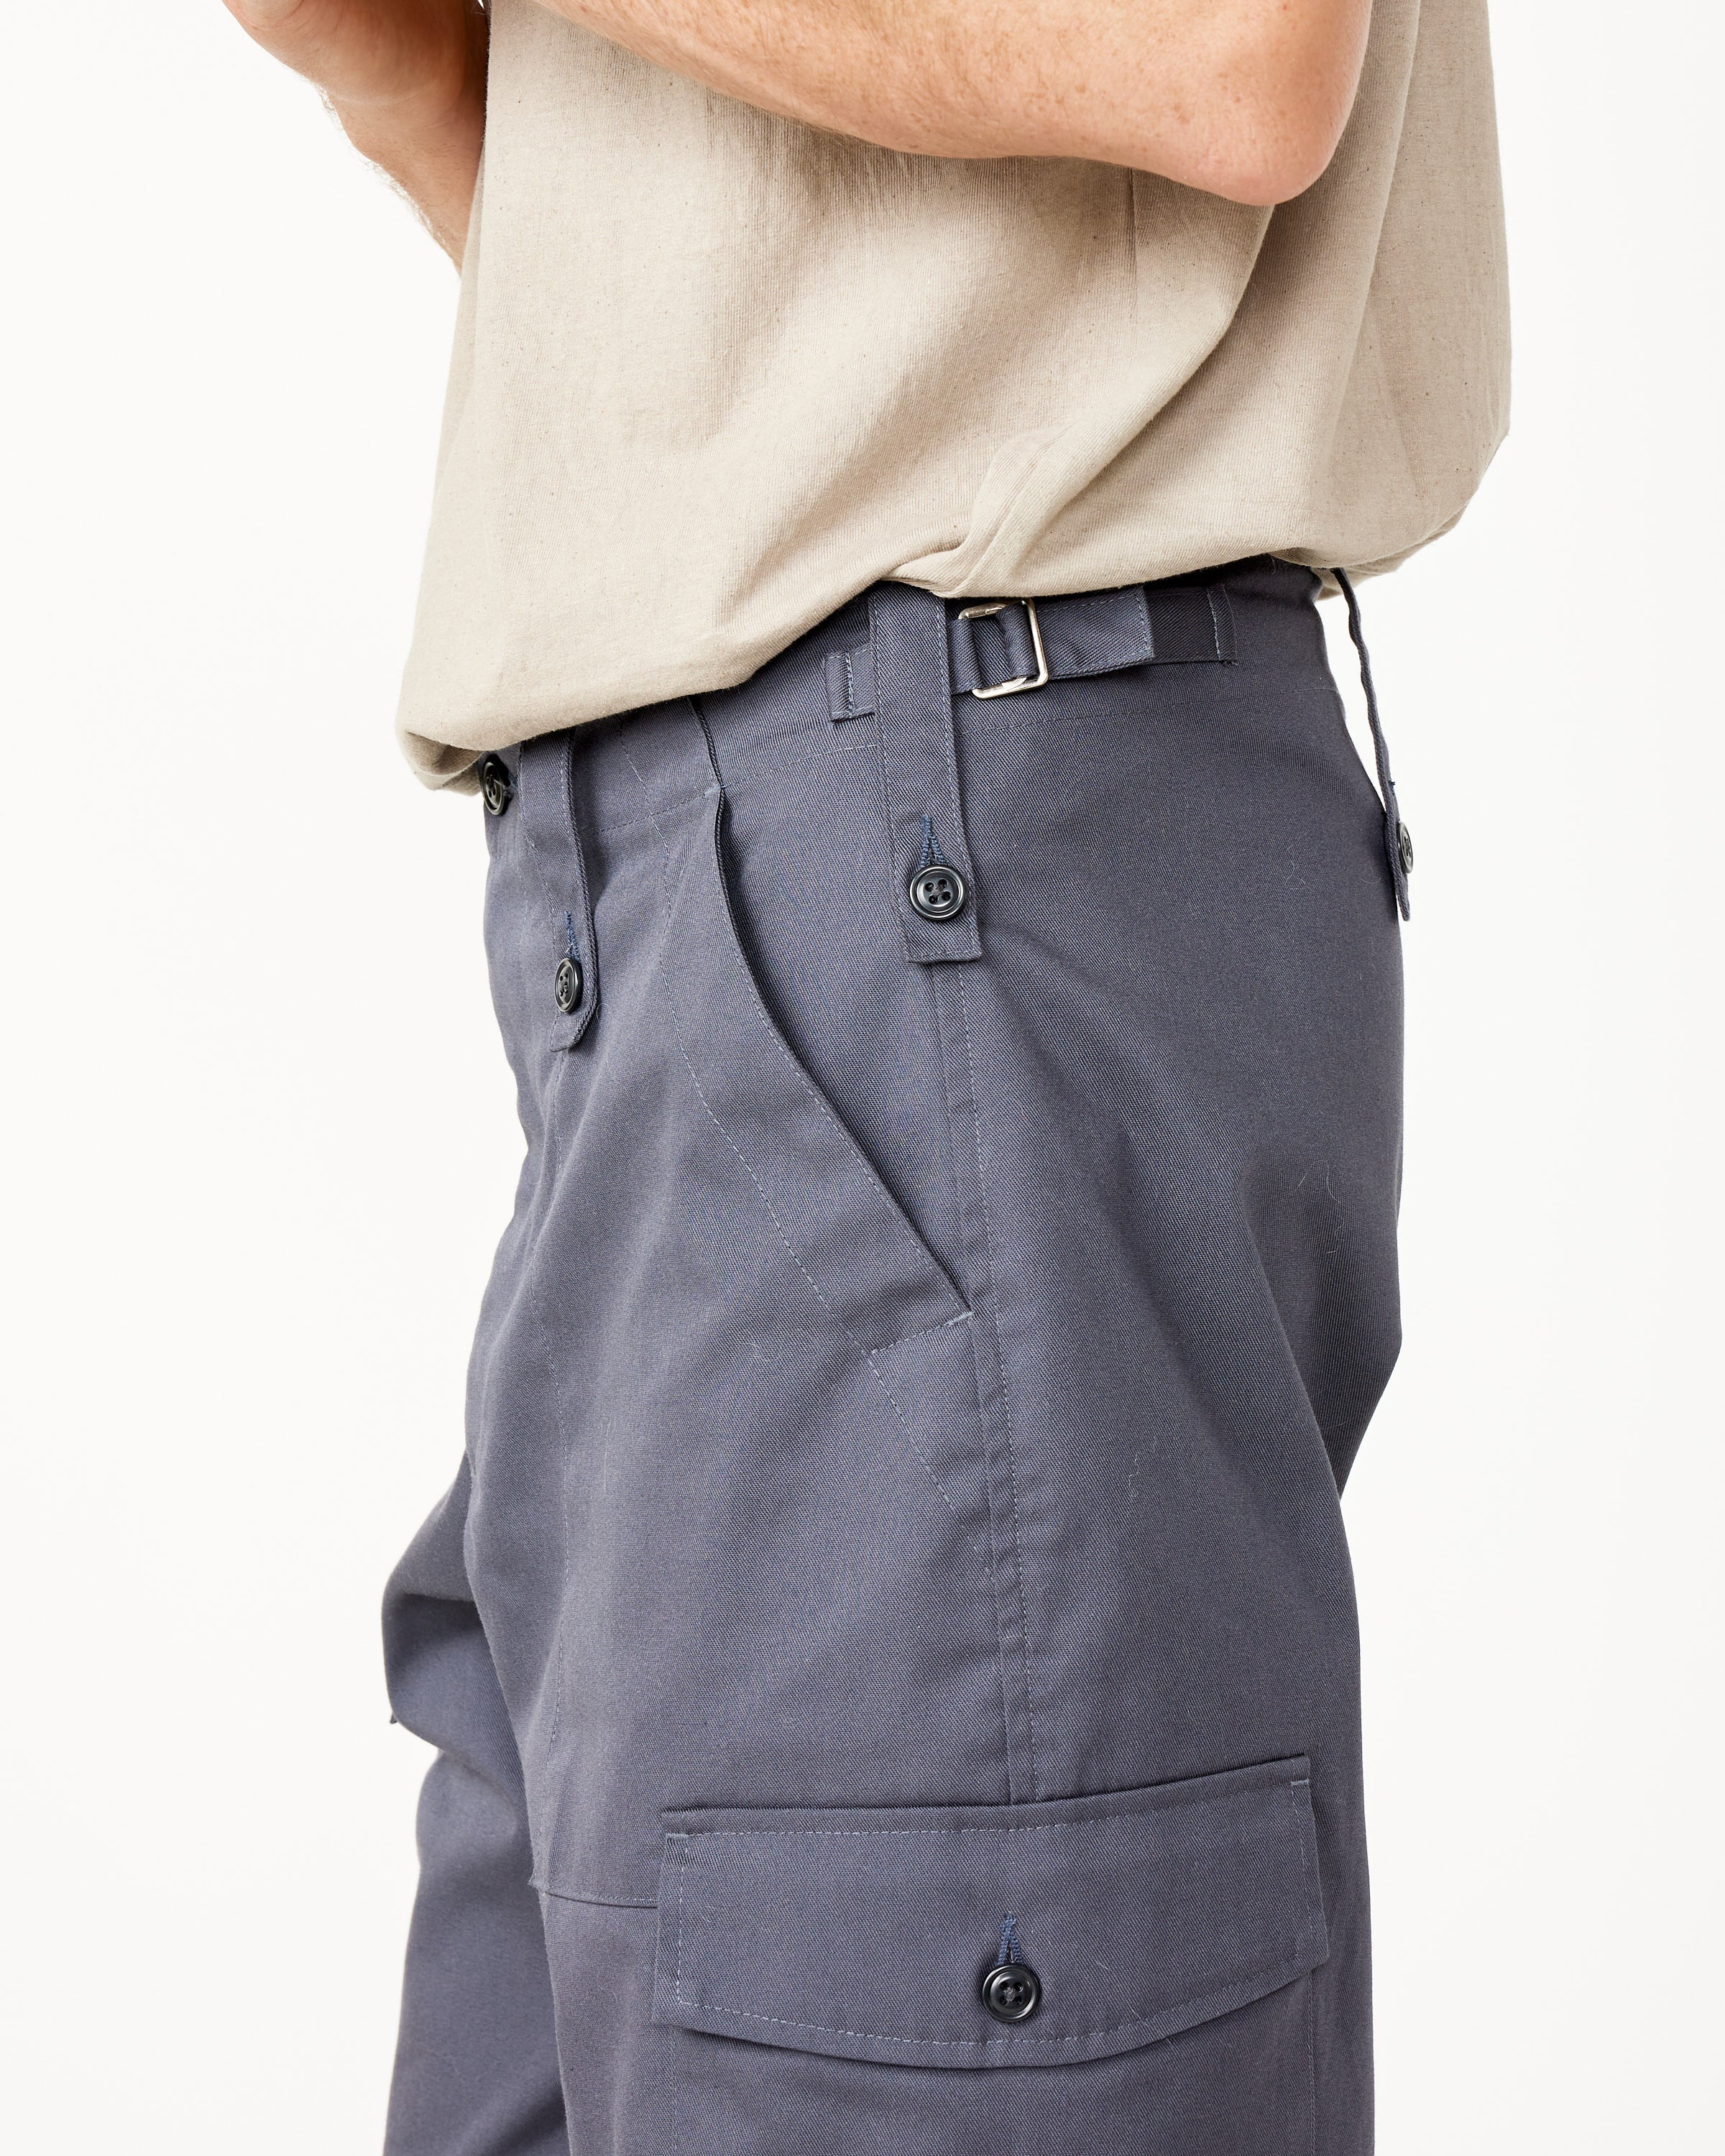 OCR Pant ECO Twill in Charcoal